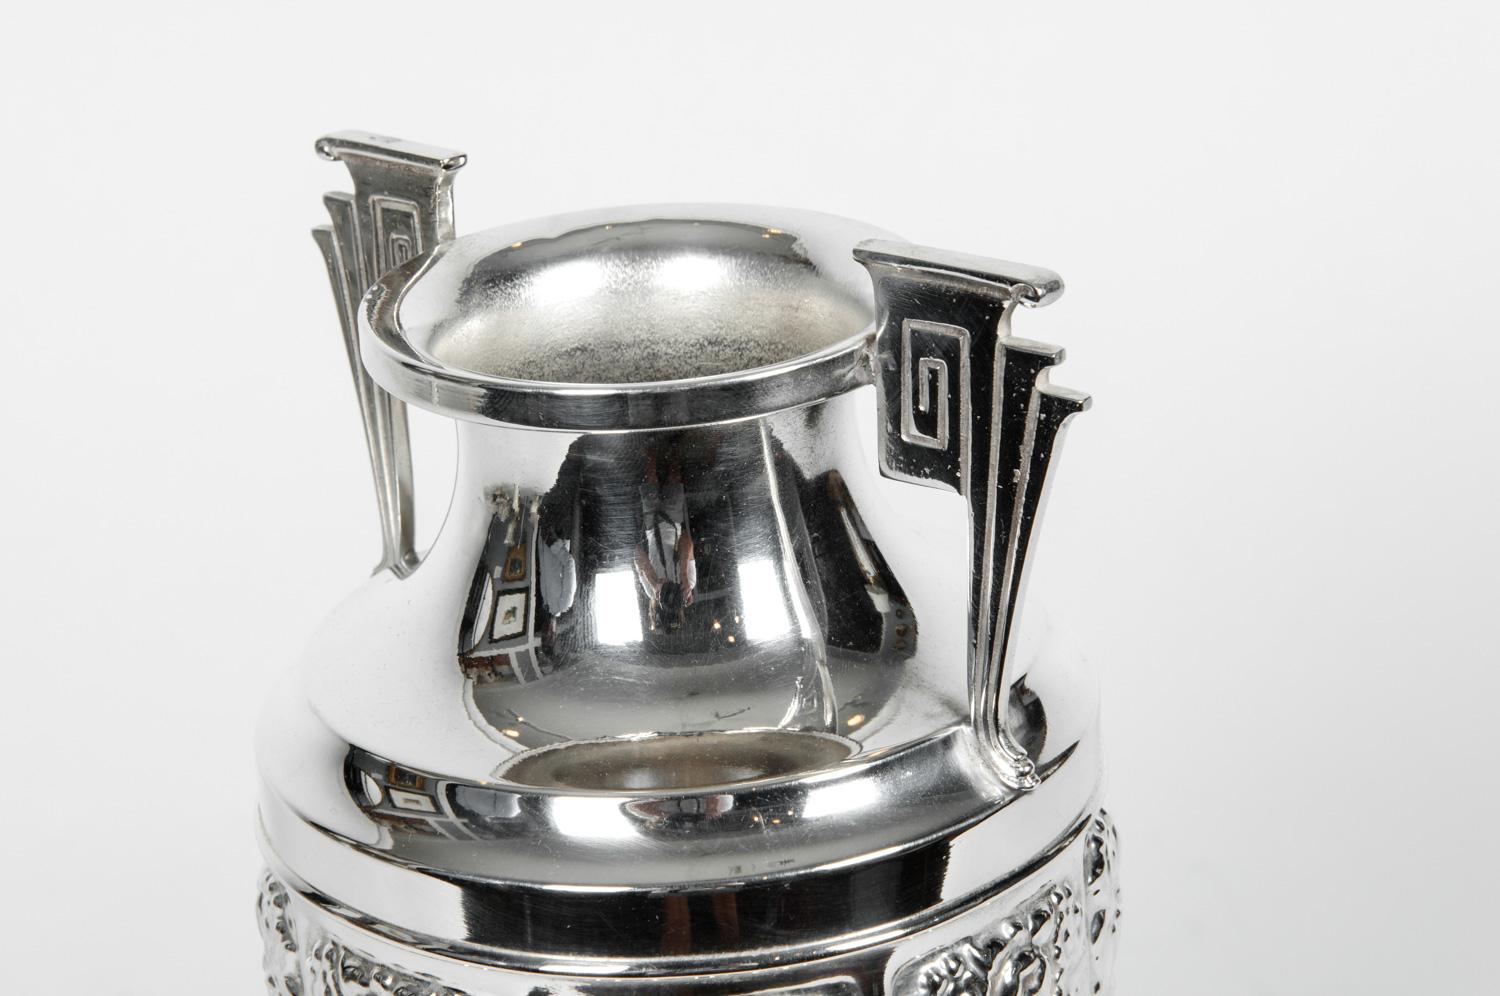 Vintage silver plate Art Deco Geek revival urn / decorative vase. The piece is in excellent condition. The vase / urn measure about 13.5 inches high x 6 inches diameter.